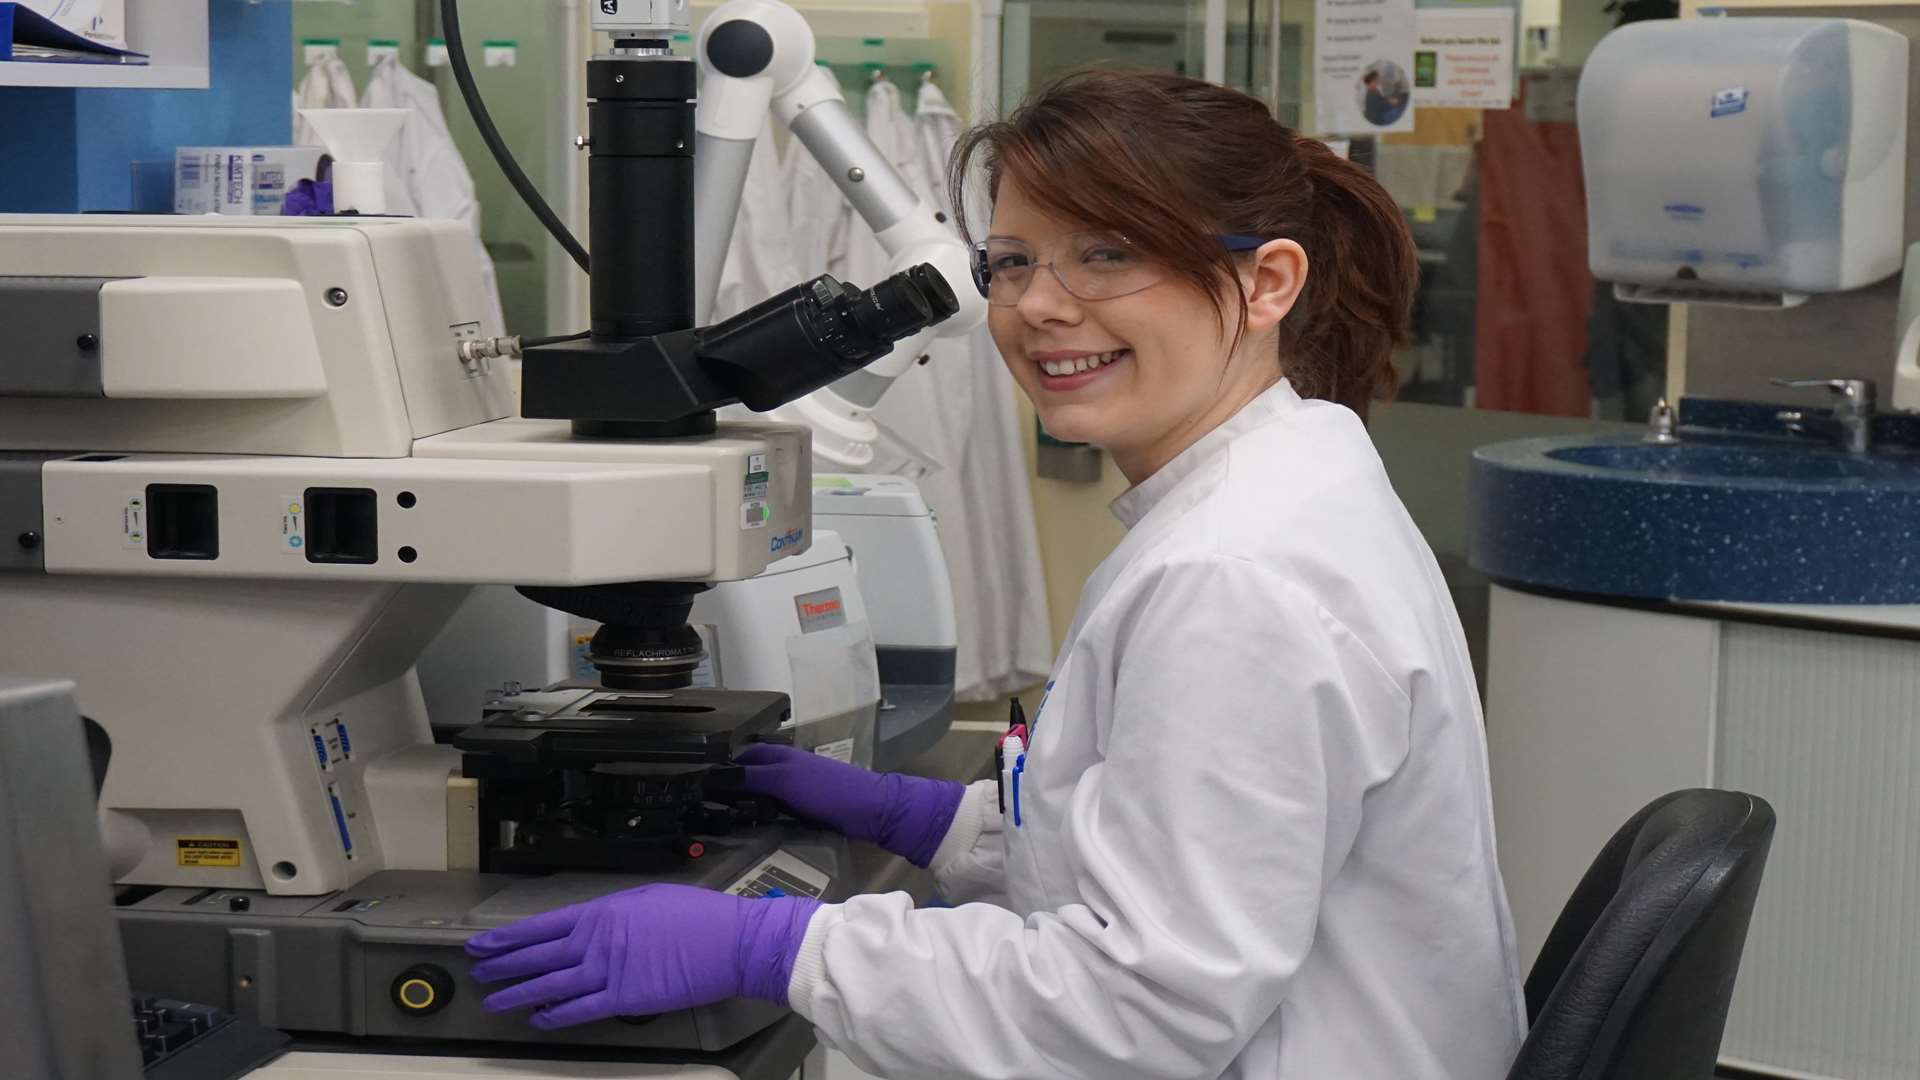 Charlotte Carr is an apprentice with Pfizer